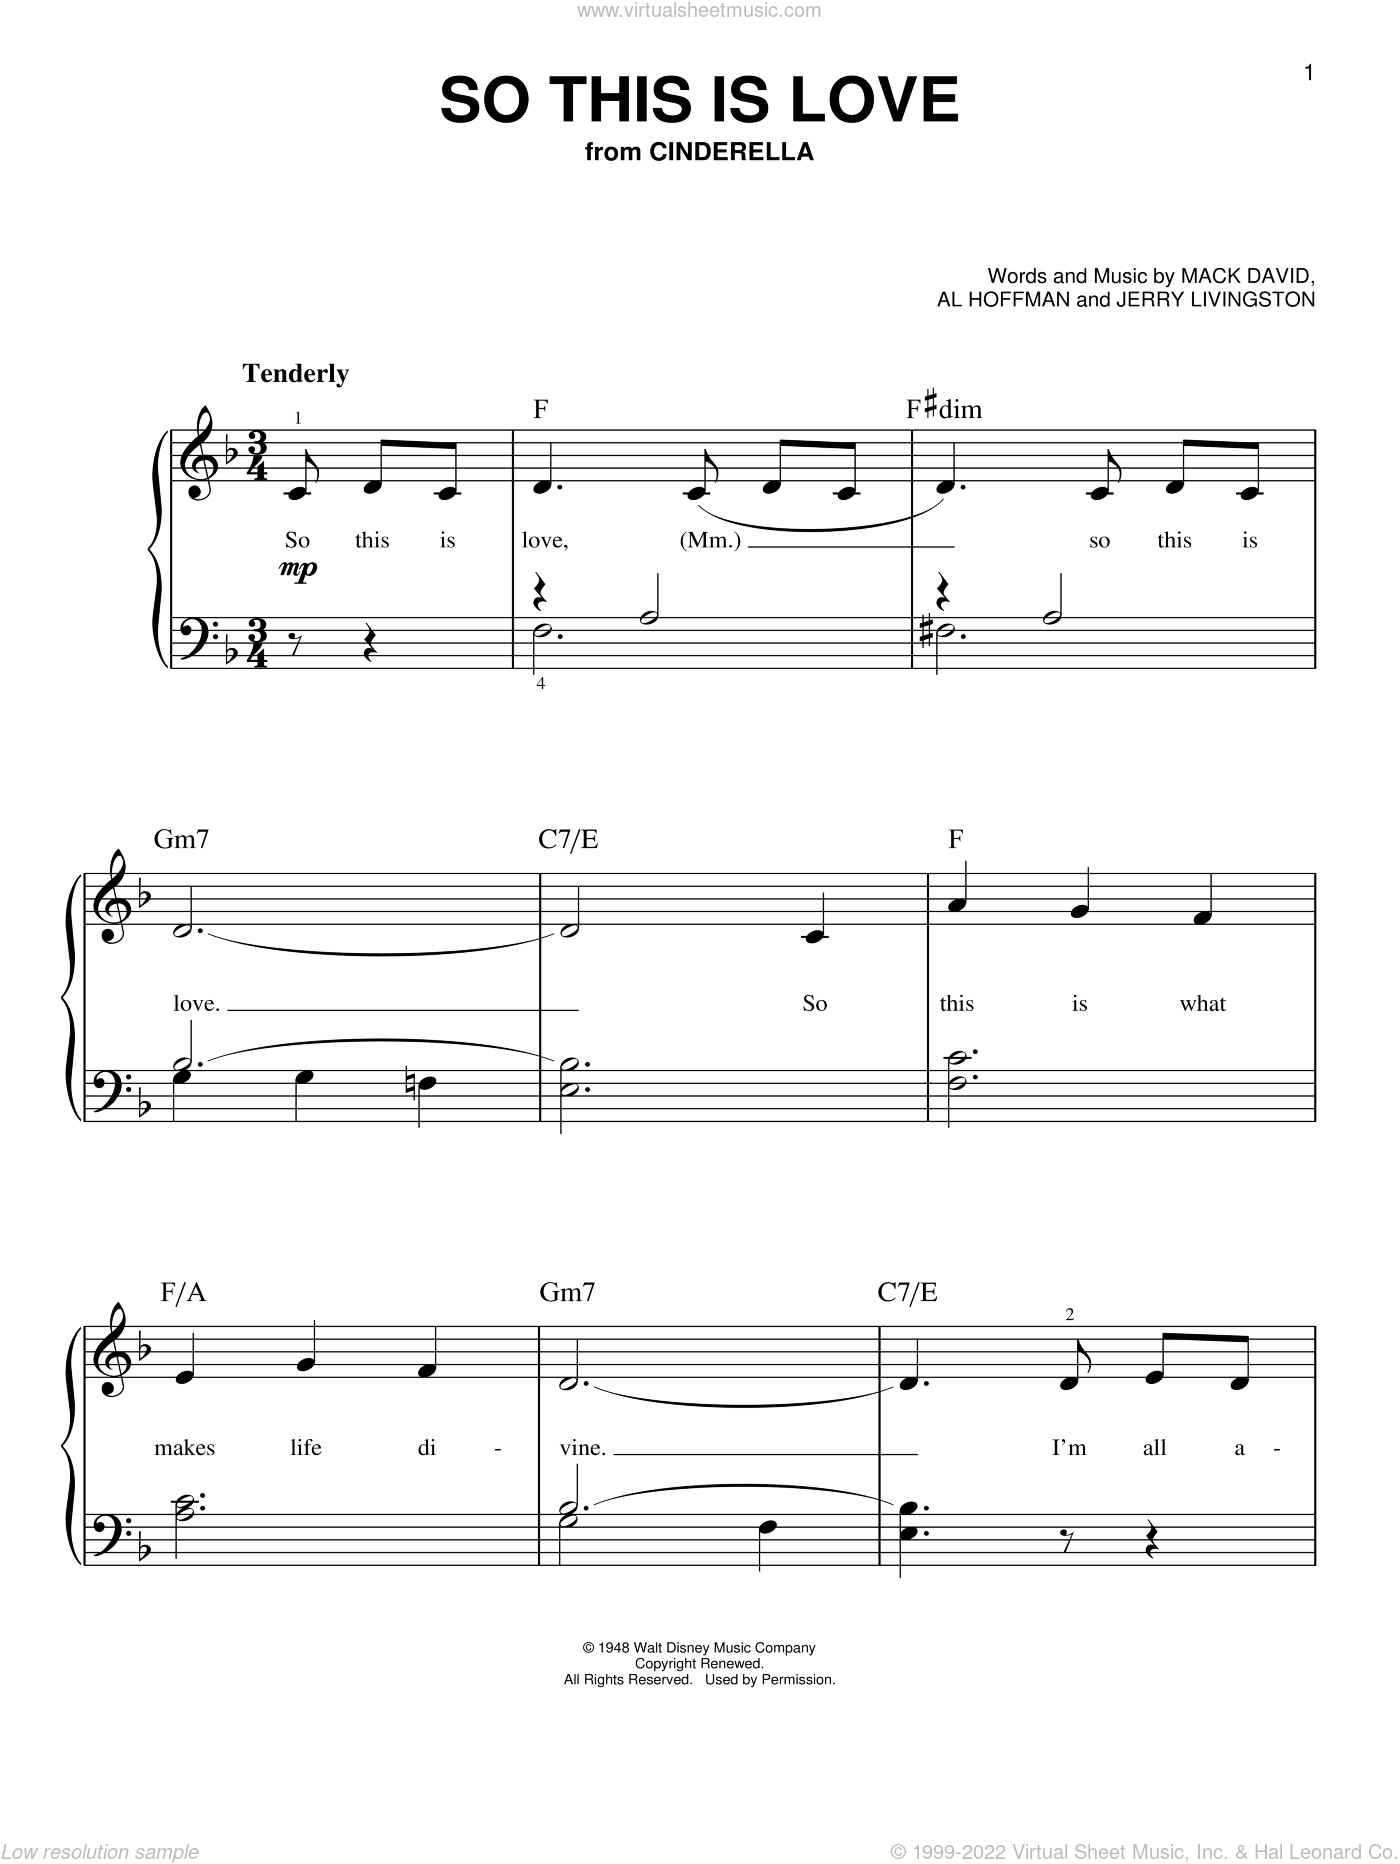 Ingram - So This Is Love sheet music for piano solo [PDF]